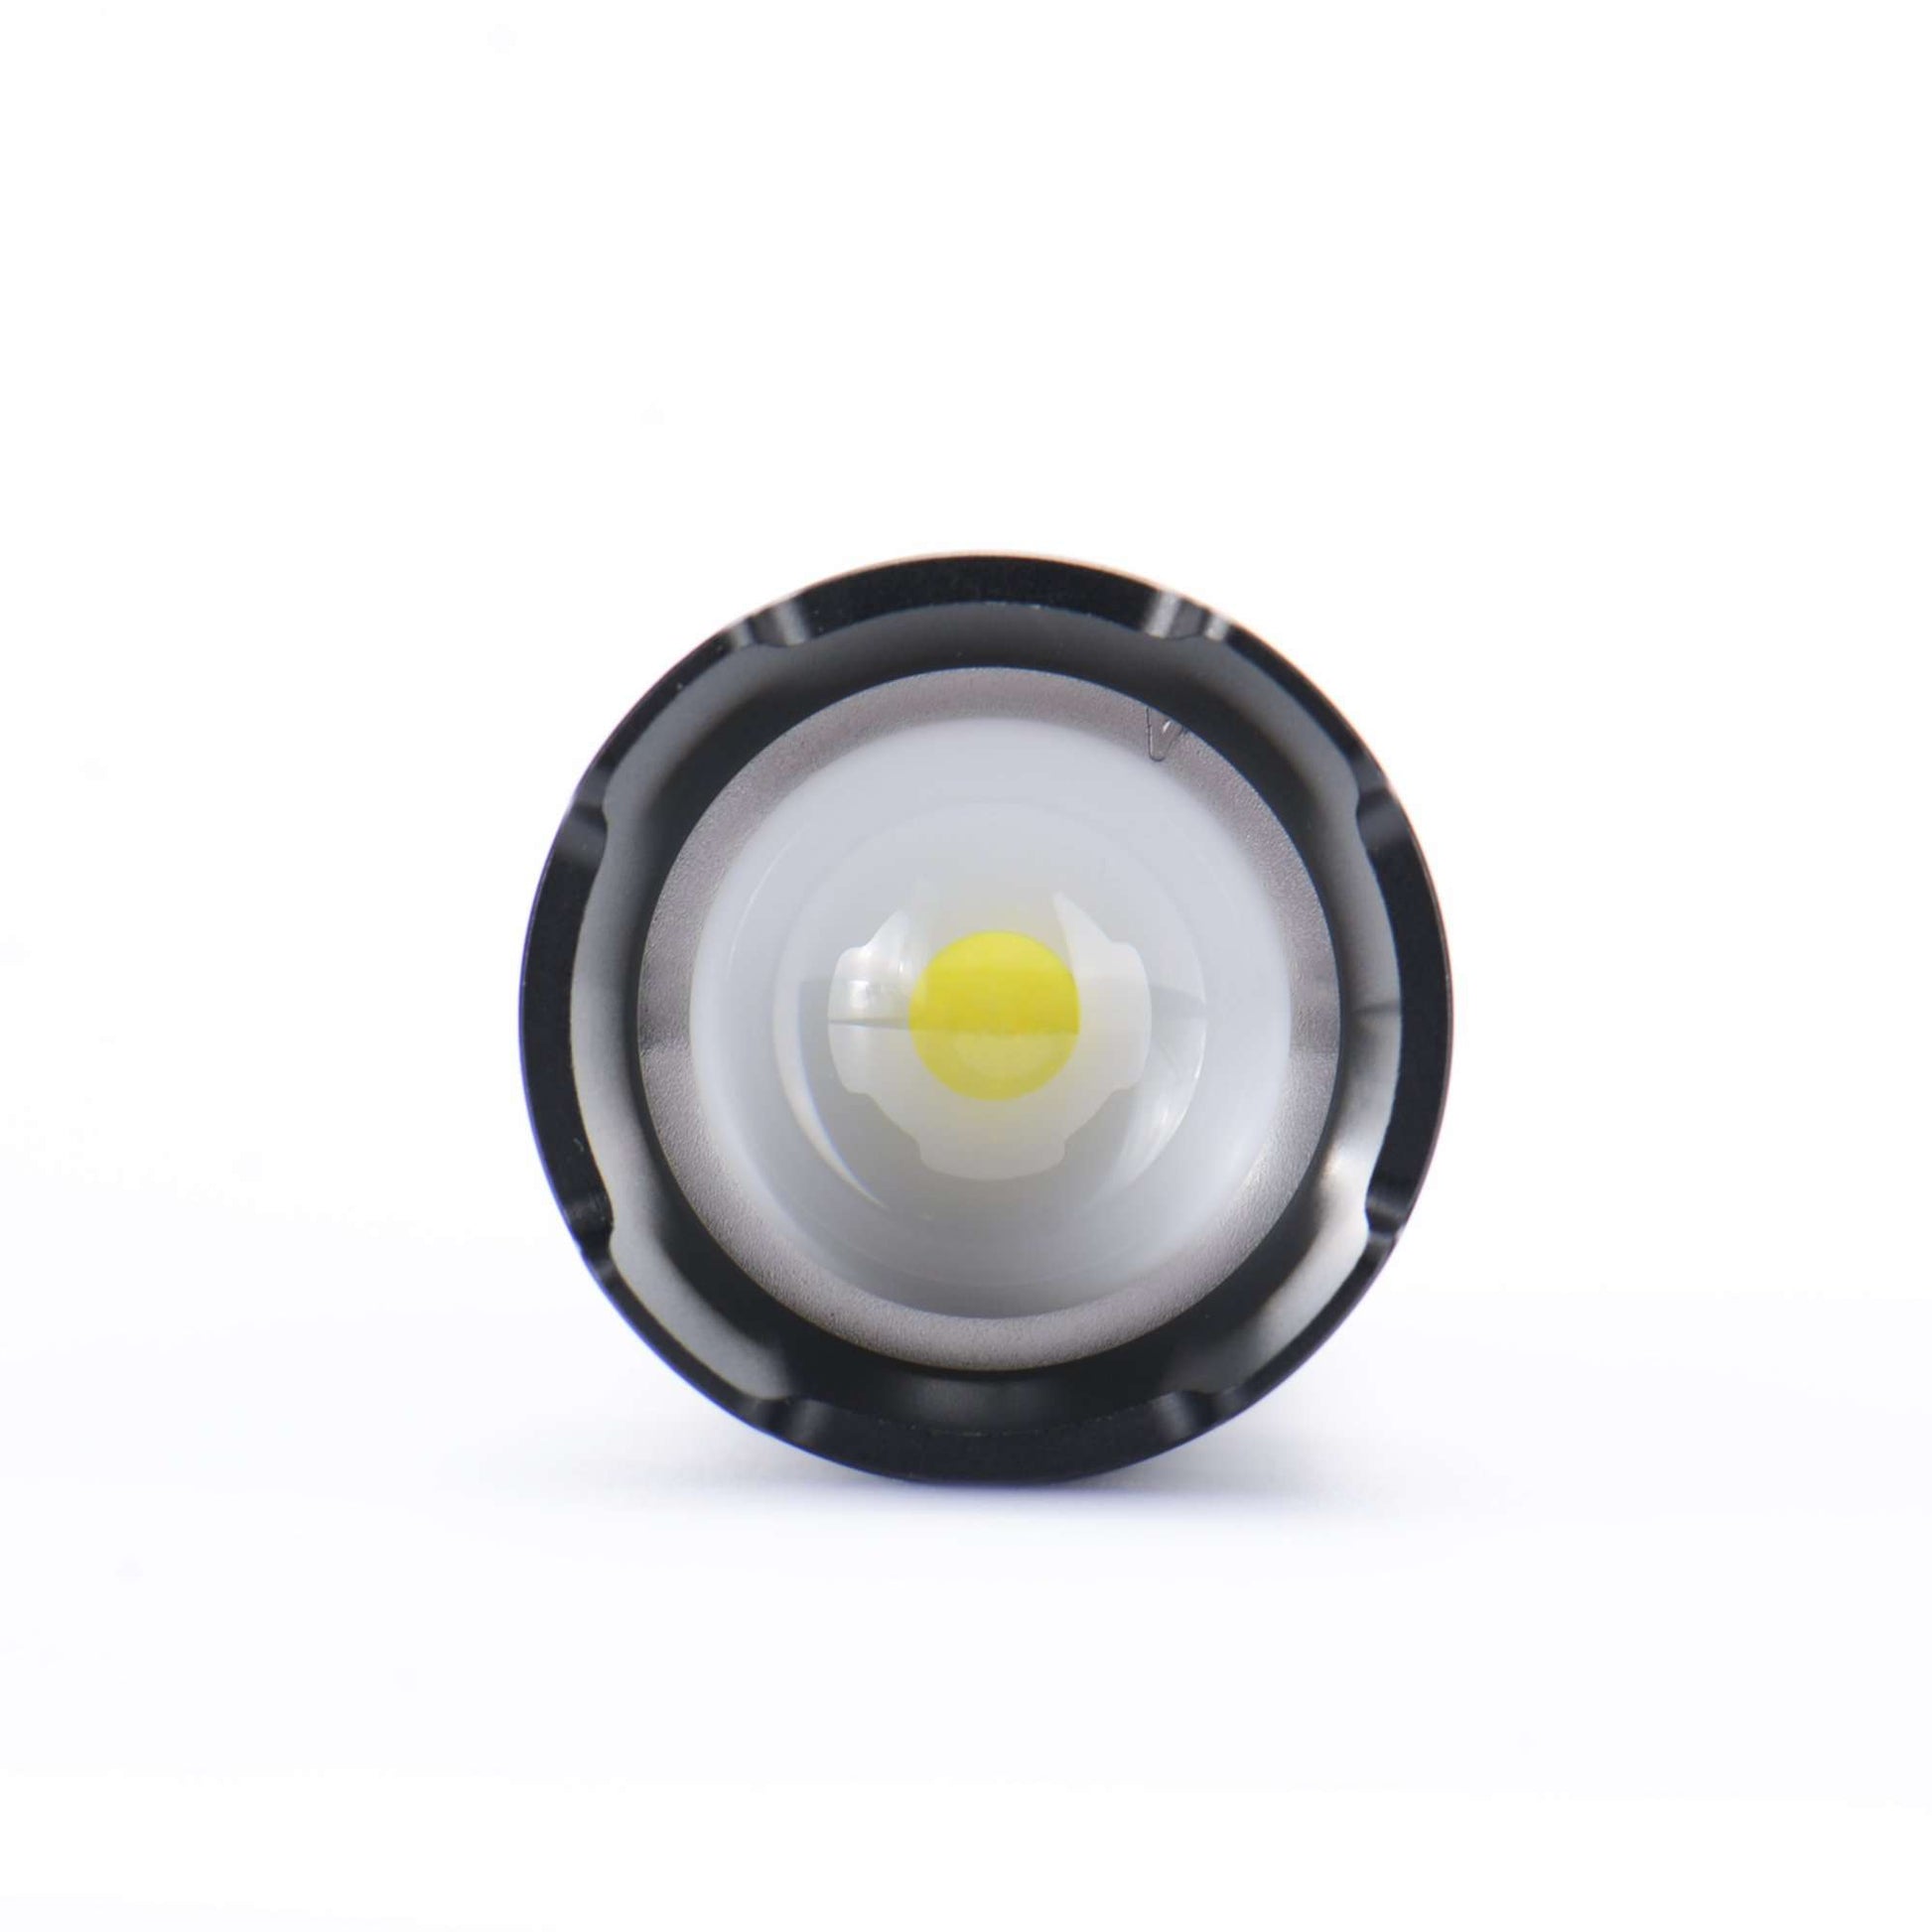 WUBEN LT35 Pro Zoomable CREE LED 1200 Lumens 18650 Battery Light for Outdoor - WUBEN